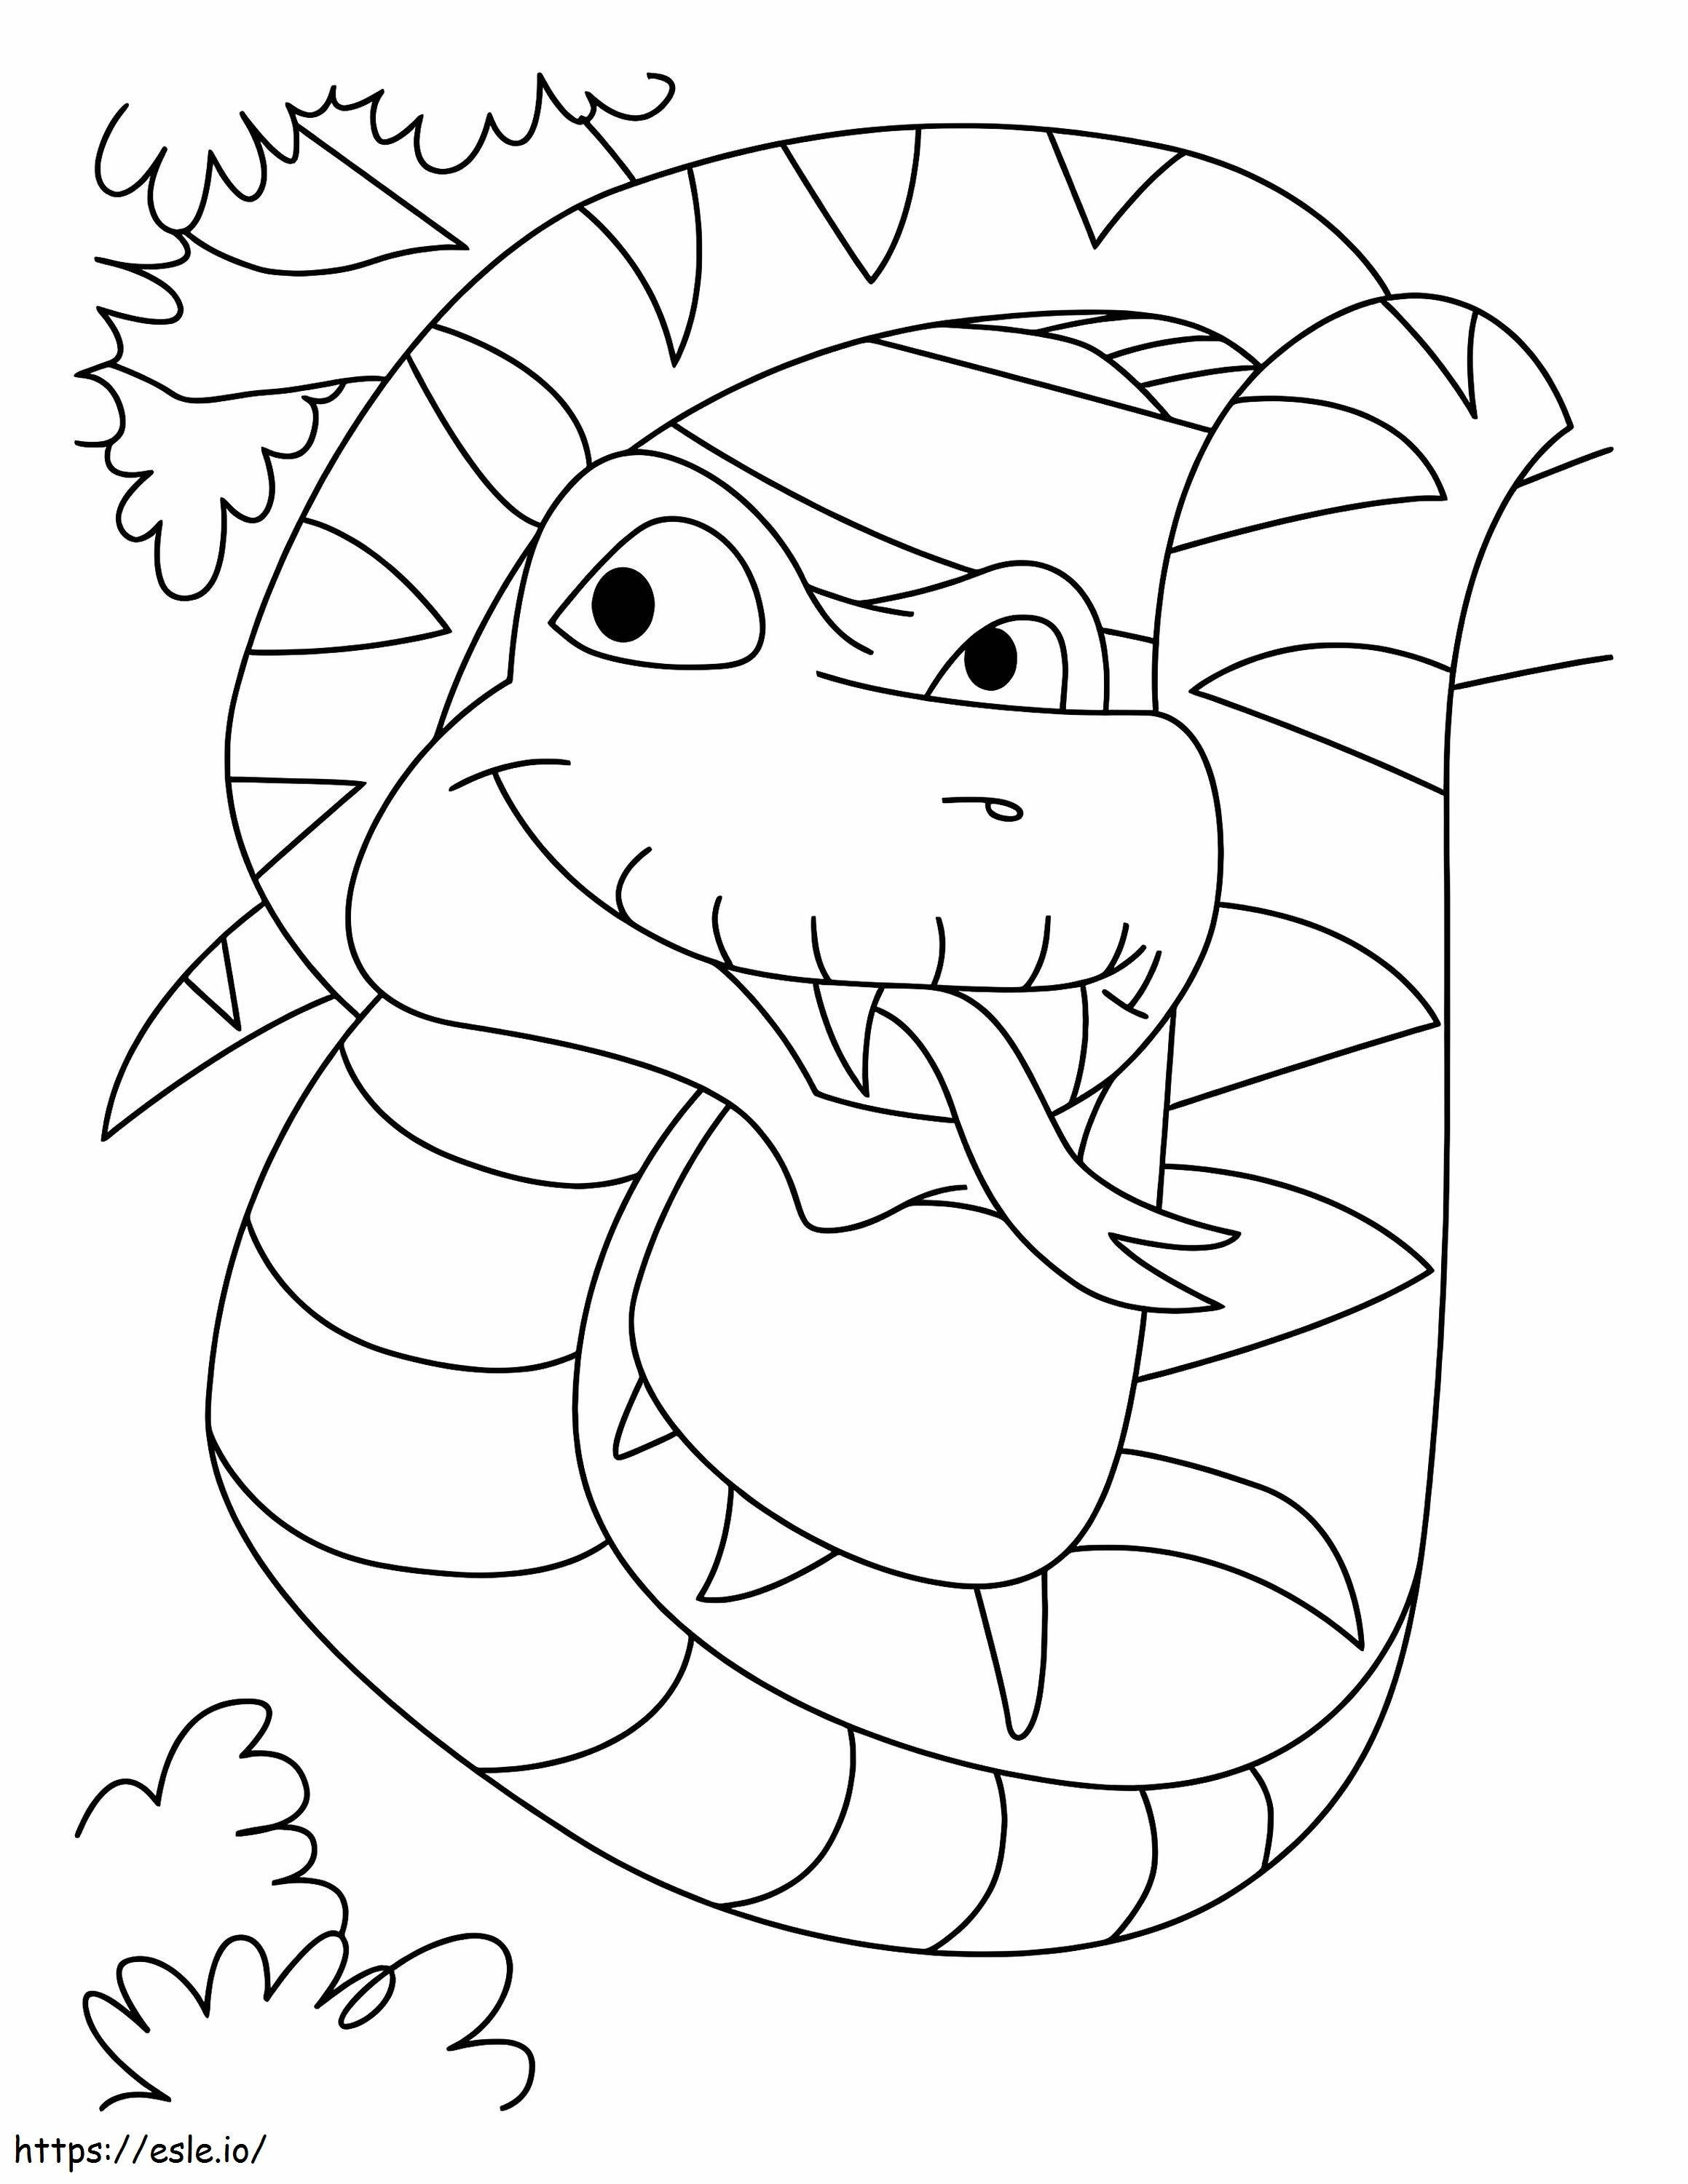 Funny Python coloring page